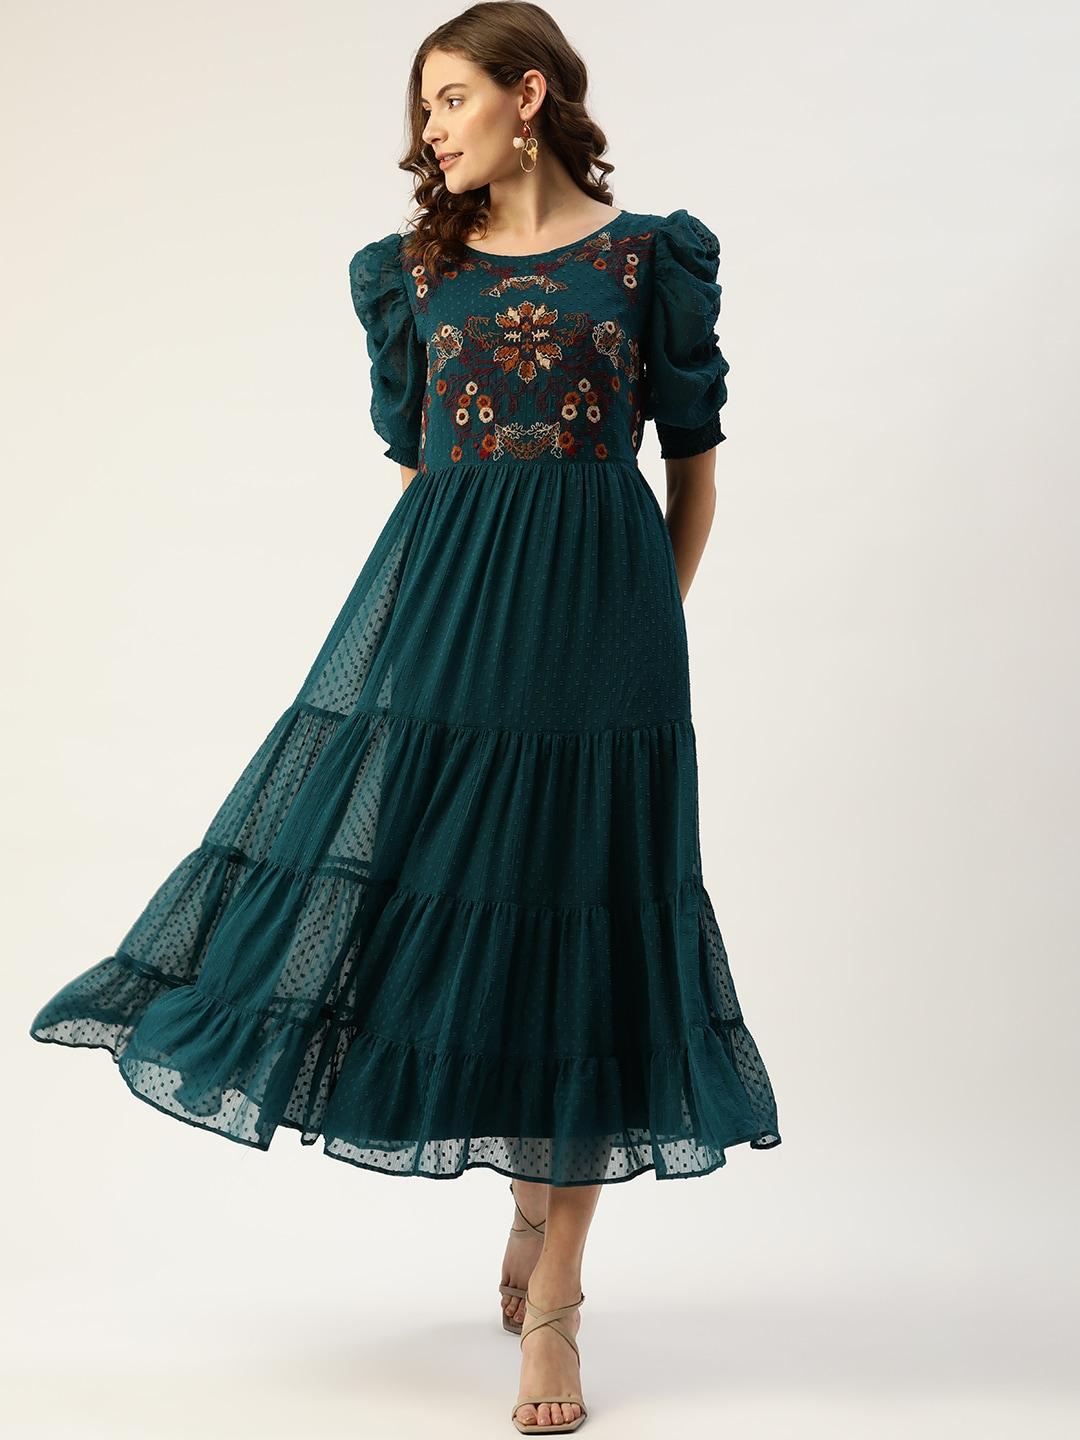 antheaa-teal-green-&-brown-floral-dobby-woven-embellished-maxi-tiered-dress